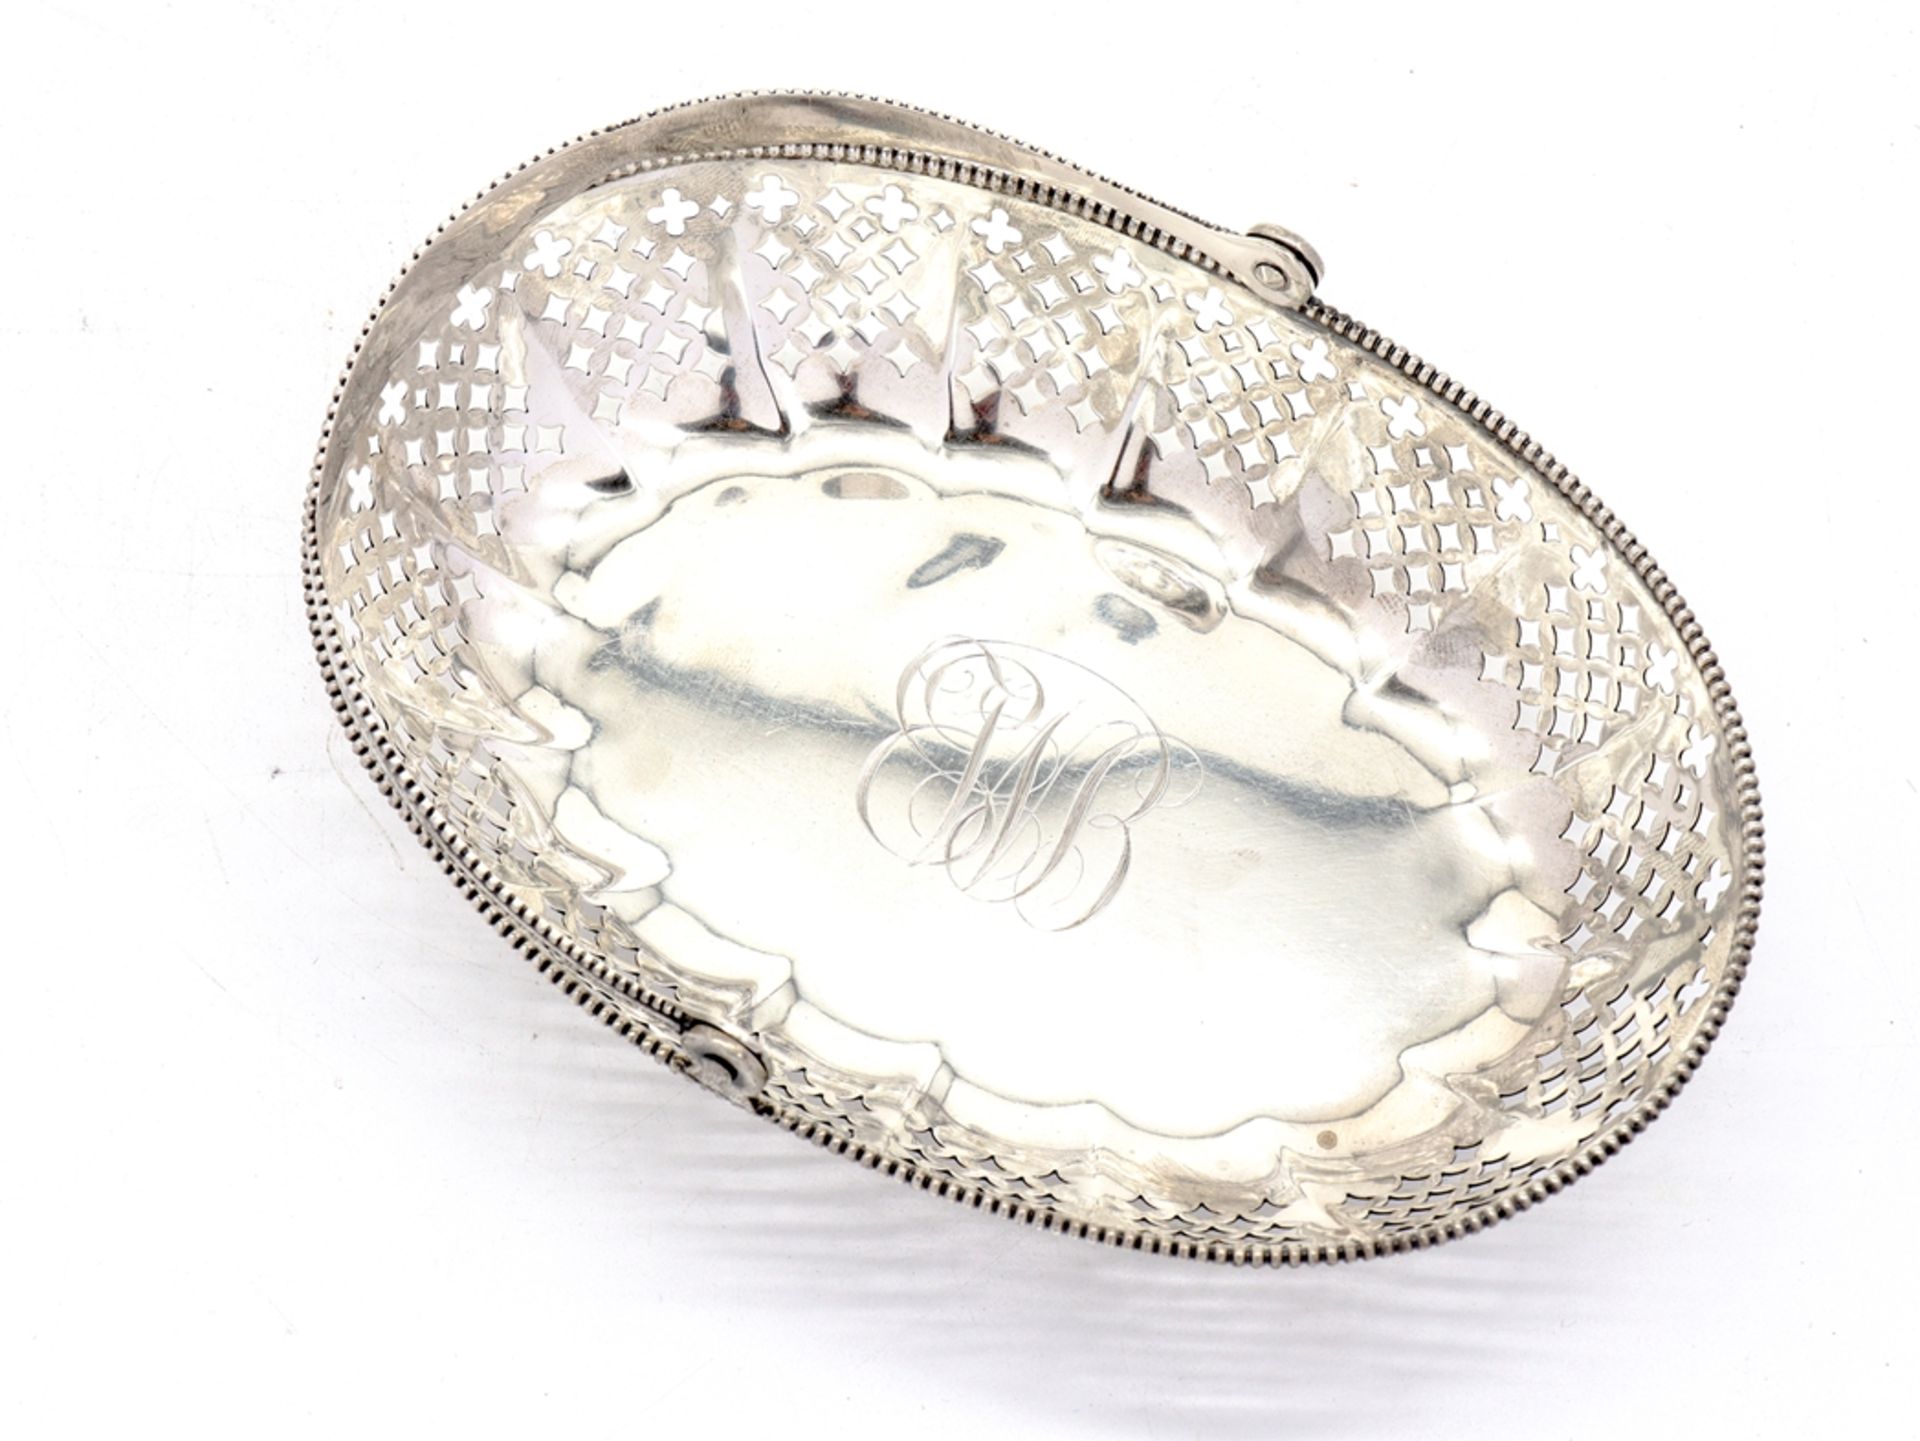 Handle basket, 925 sterling silver, dated 1899 - Image 4 of 7